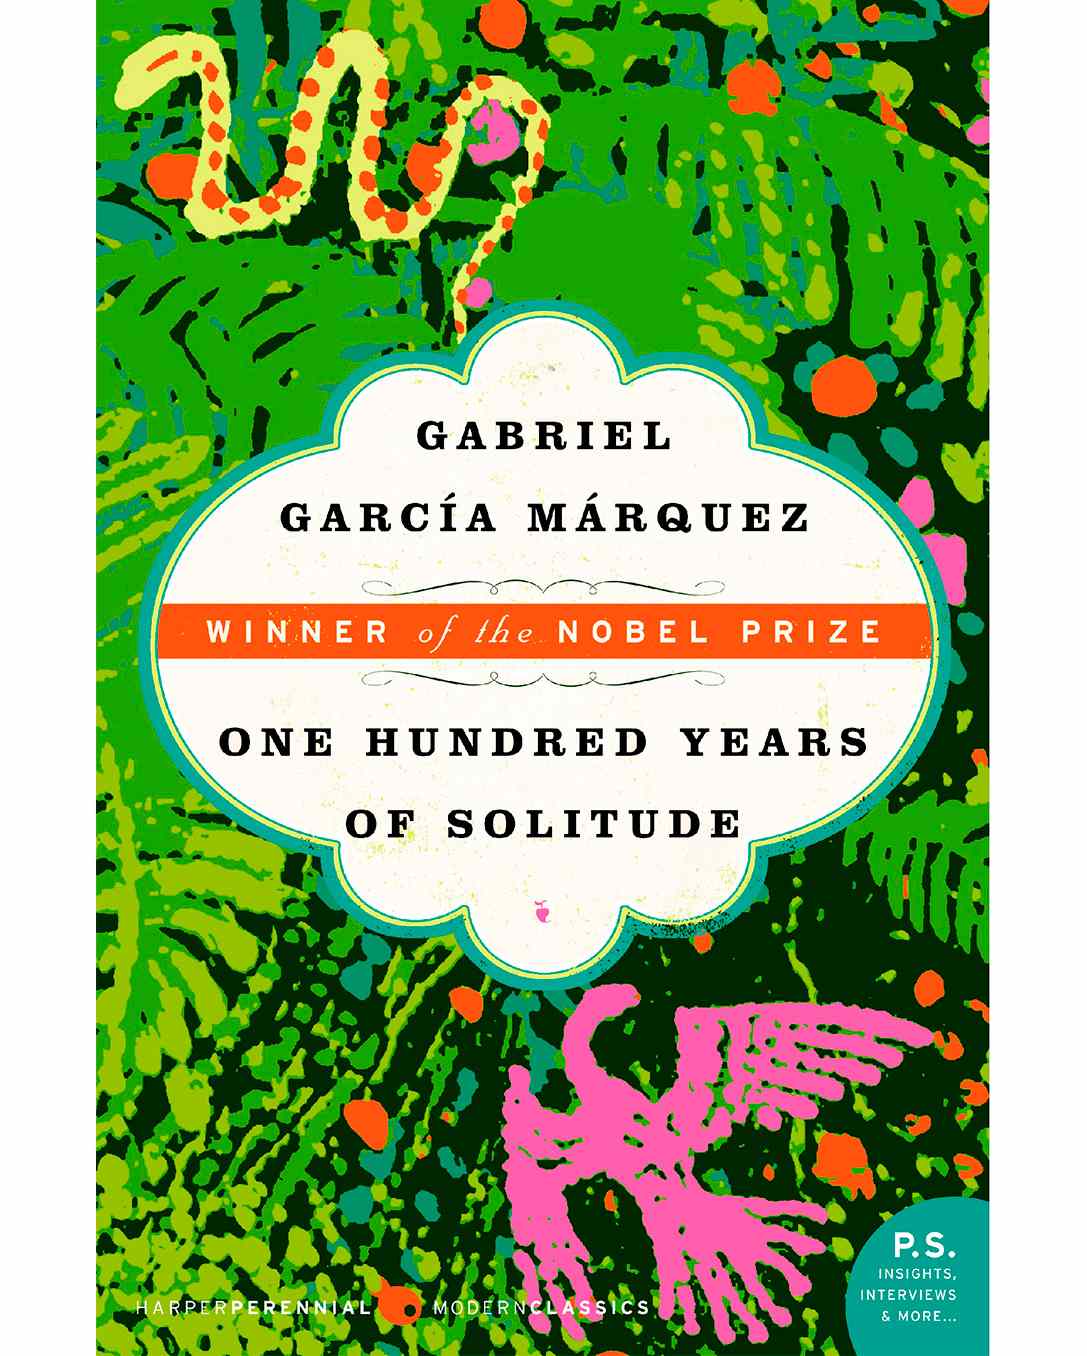 One Hundred Years of Solitude by Gabriel Garc&iacute;a M&aacute;rquez